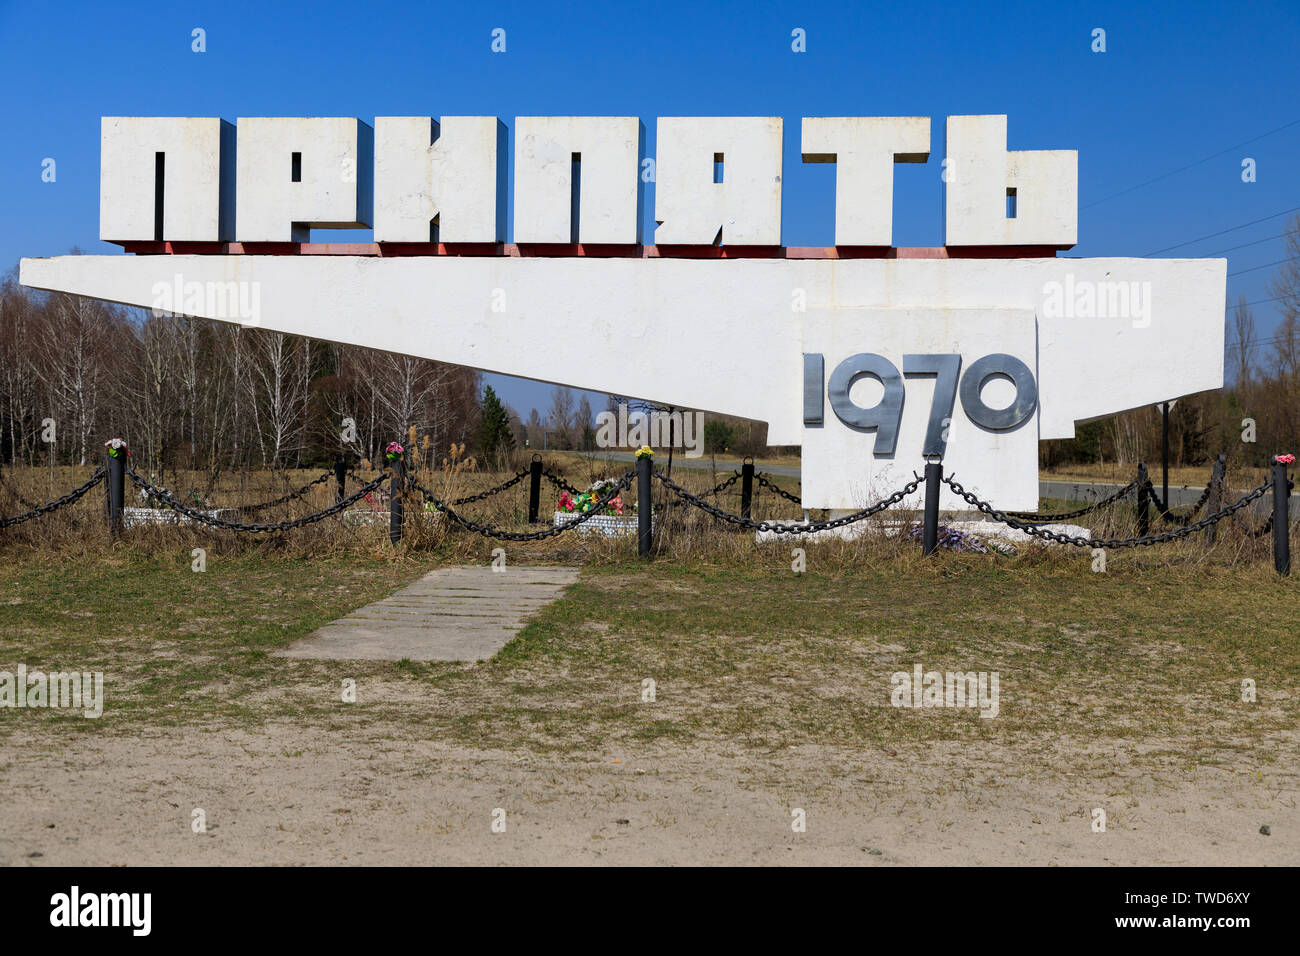 Eastern Europe, Ukraine, Pripyat, Chernobyl. The Pripyat town sign, founded in 1970 and abandoned since the 1986 nuclear disaster. April 10, 2018. Stock Photo